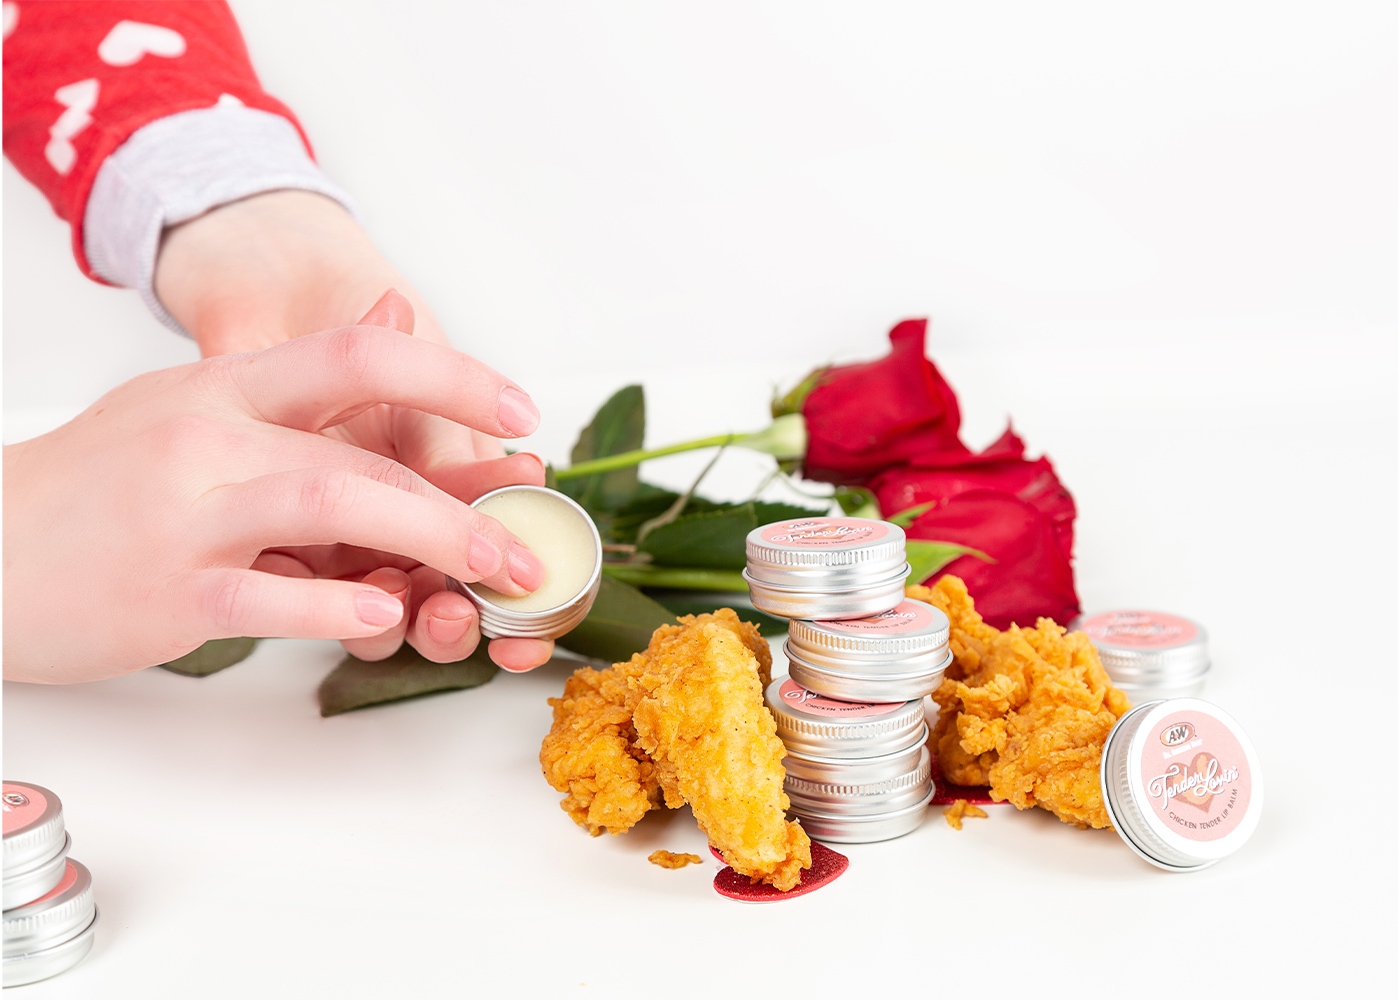 Hand holding tin of Tender Lovin' Lip Balm. Roses and A&W Chicken Tenders are in the background.